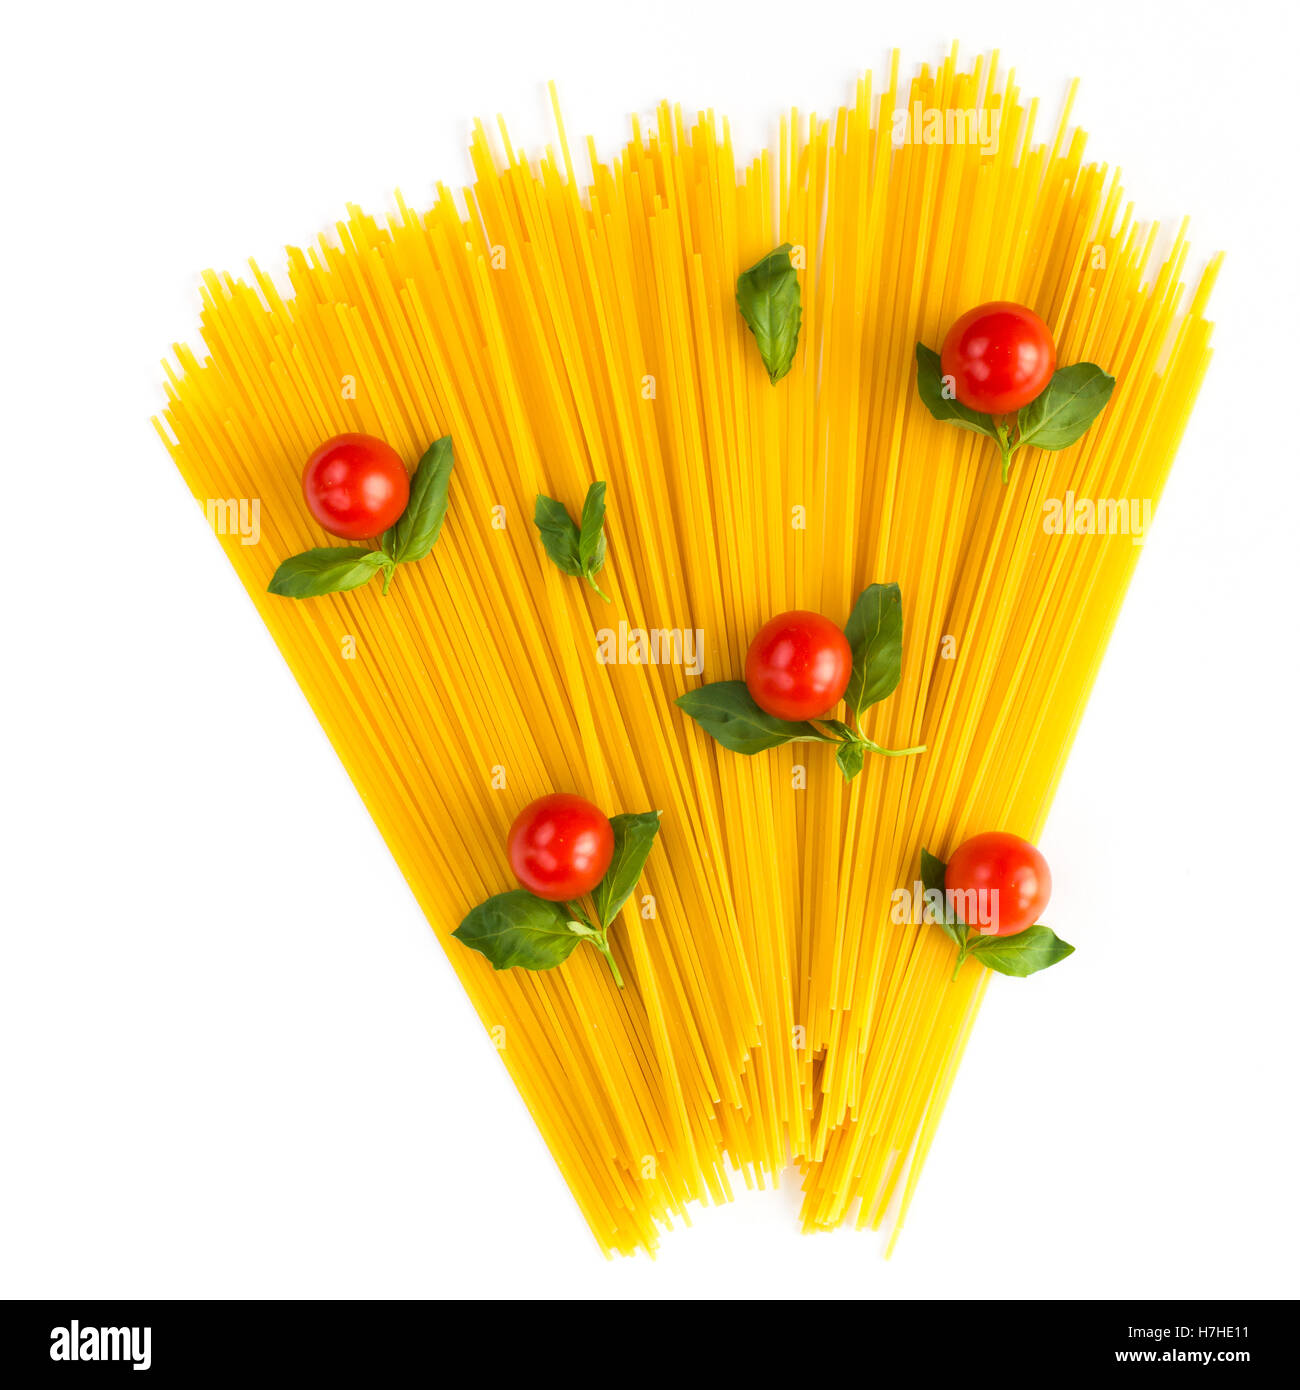 Italian spaghetti raw ingredients with red tomatoes and fresh basil leafs on a white board background, top view Stock Photo